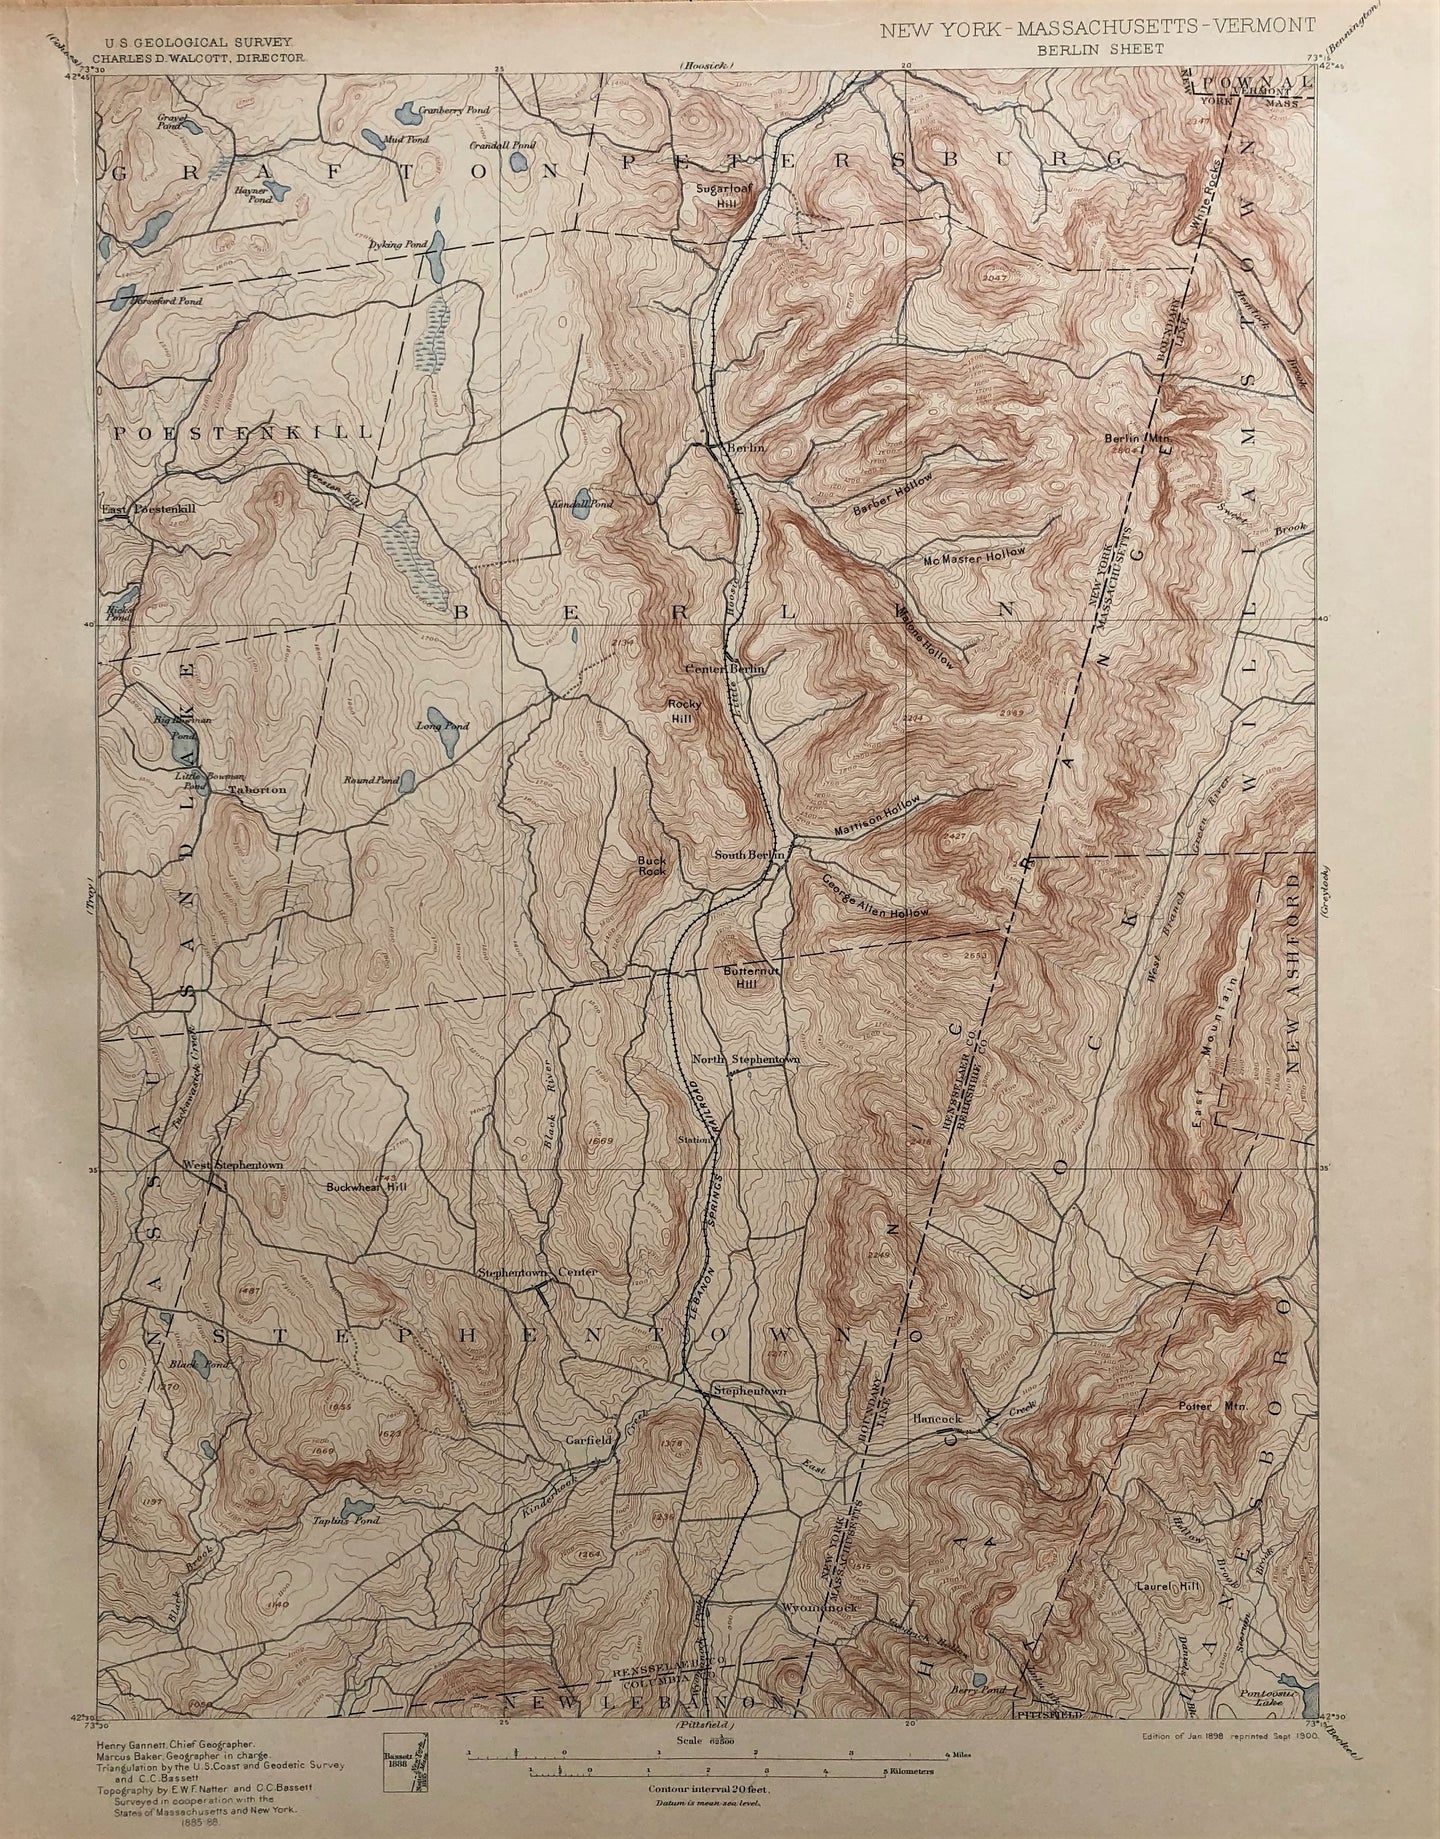 Genuine-Antique-Topographic-map-Berlin-New-York-NY/MA/VT-Antique-Topo-Map-Antique-Geological-&-Topographical-Maps-Vermont-1900-USGS-Maps-Of-Antiquity-1800s-19th-century